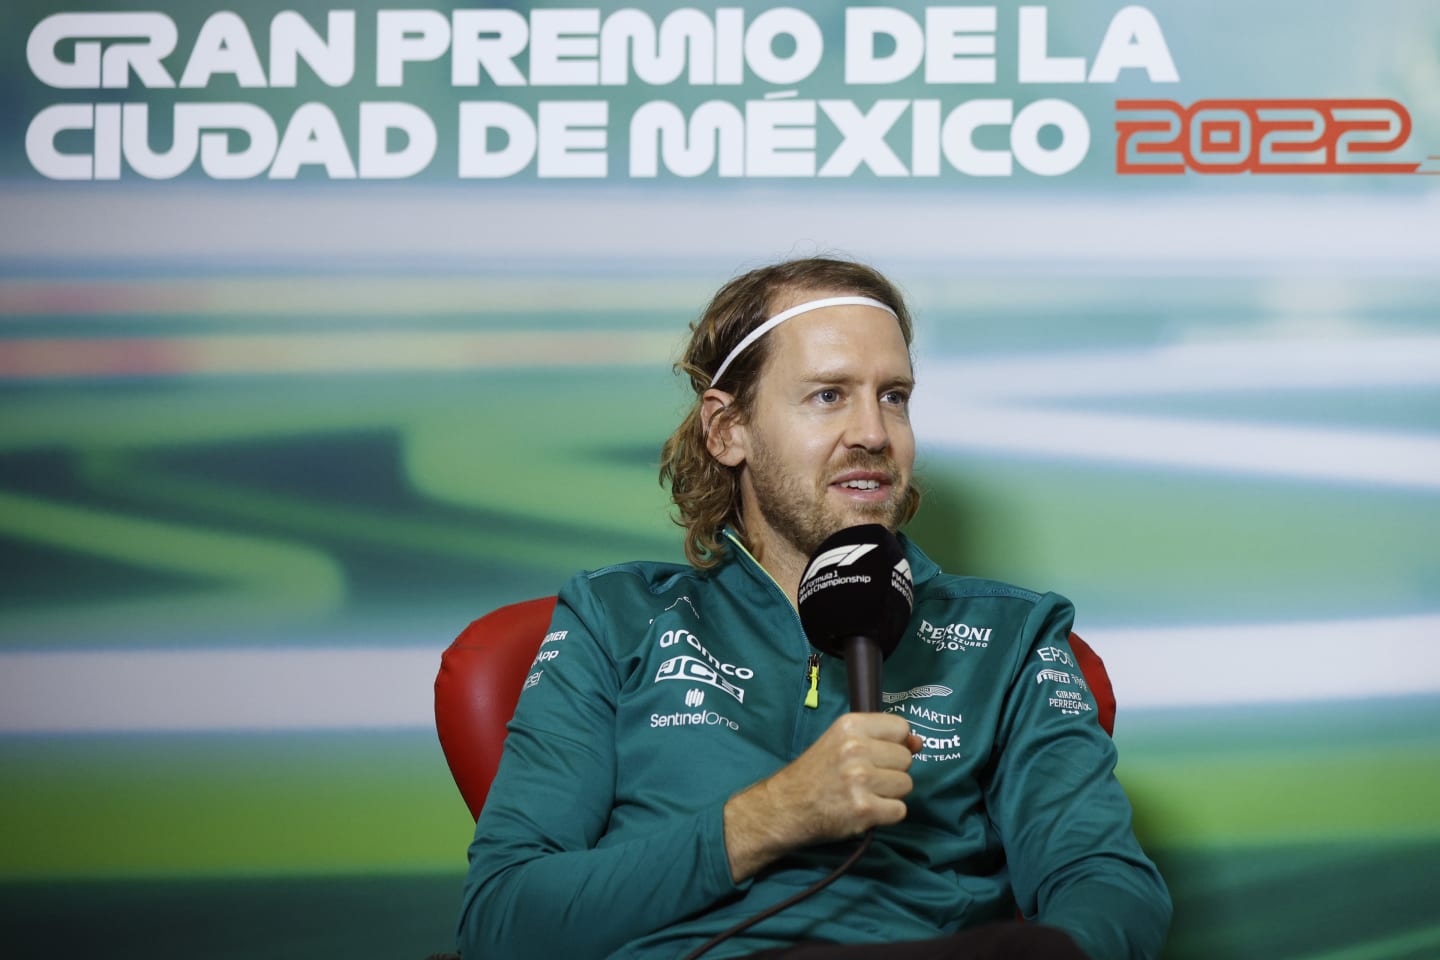 MEXICO CITY, MEXICO - OCTOBER 27: Sebastian Vettel of Germany and Aston Martin F1 Team attends the Drivers Press Conference during previews ahead of the F1 Grand Prix of Mexico at Autodromo Hermanos Rodriguez on October 27, 2022 in Mexico City, Mexico. (Photo by Jared C. Tilton/Getty Images)